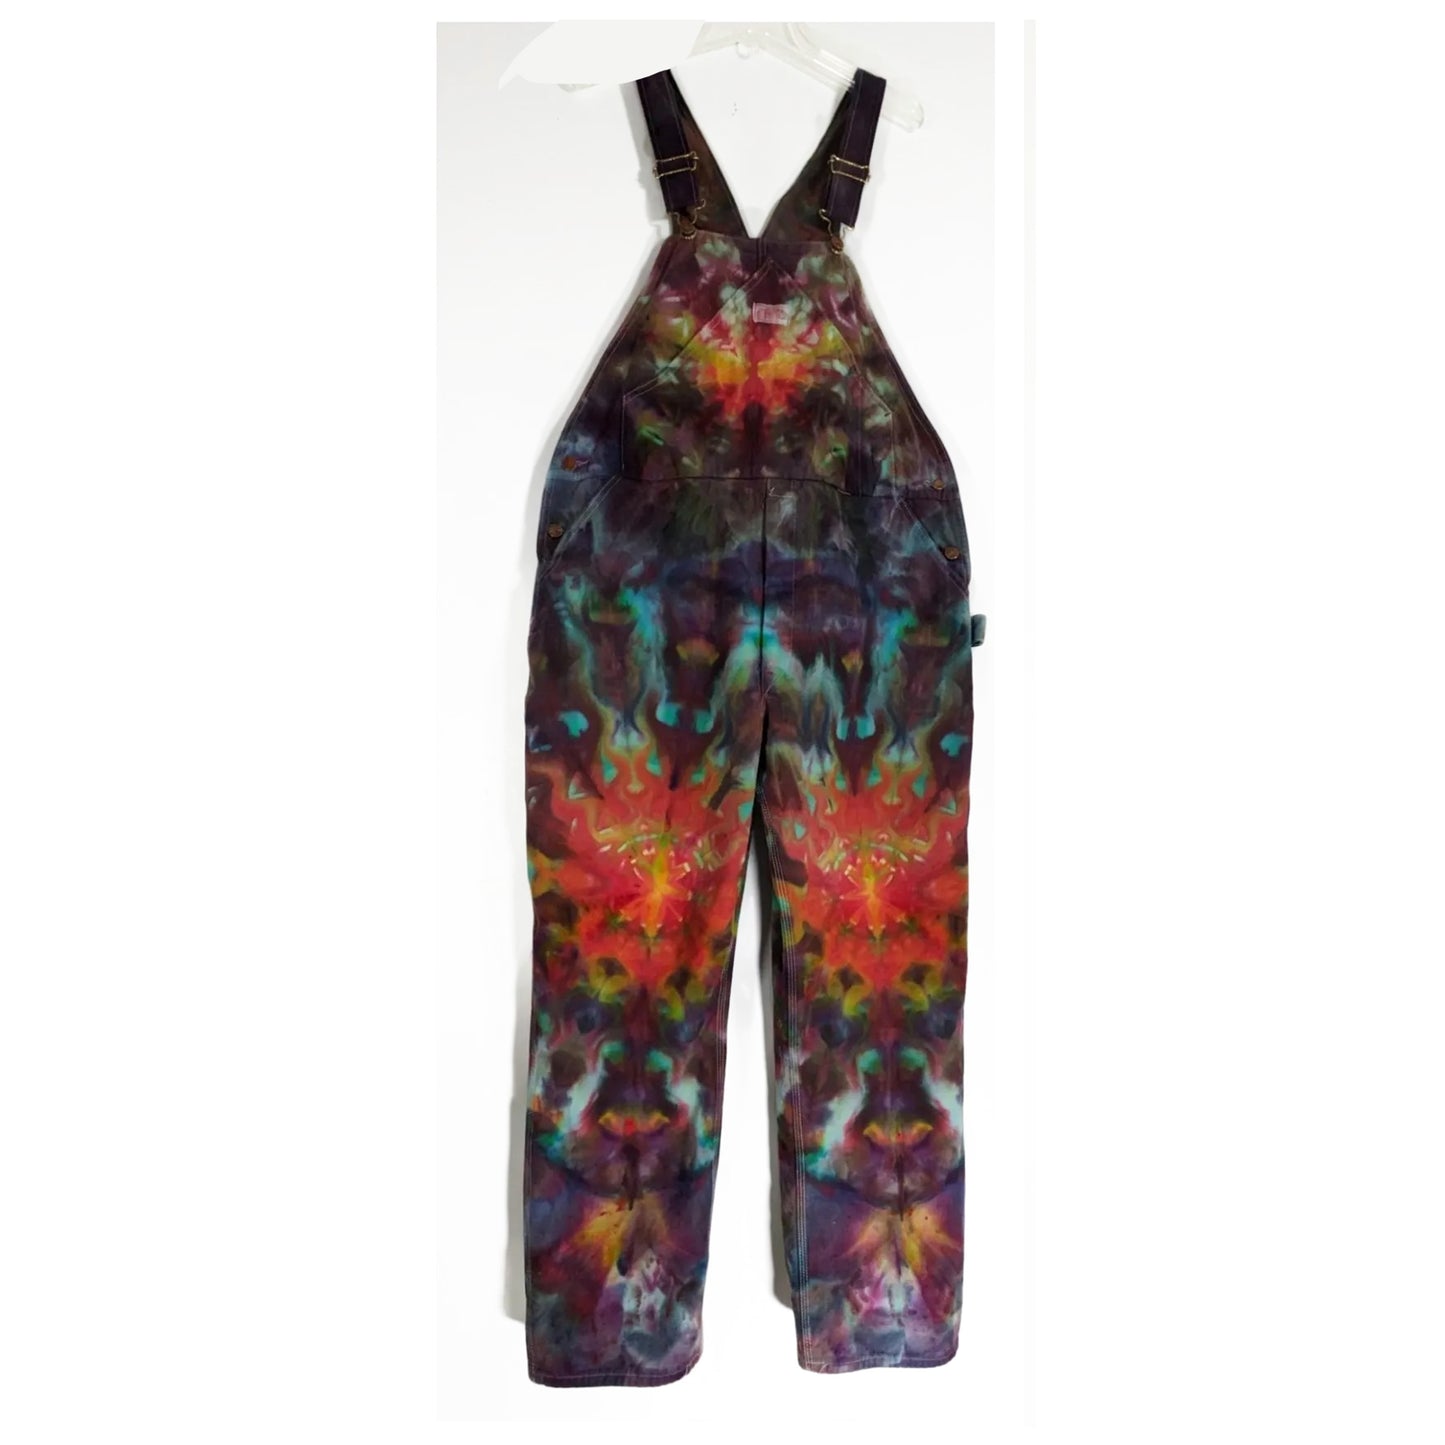 Tie Dyed Overalls Vintage Round House 38x31